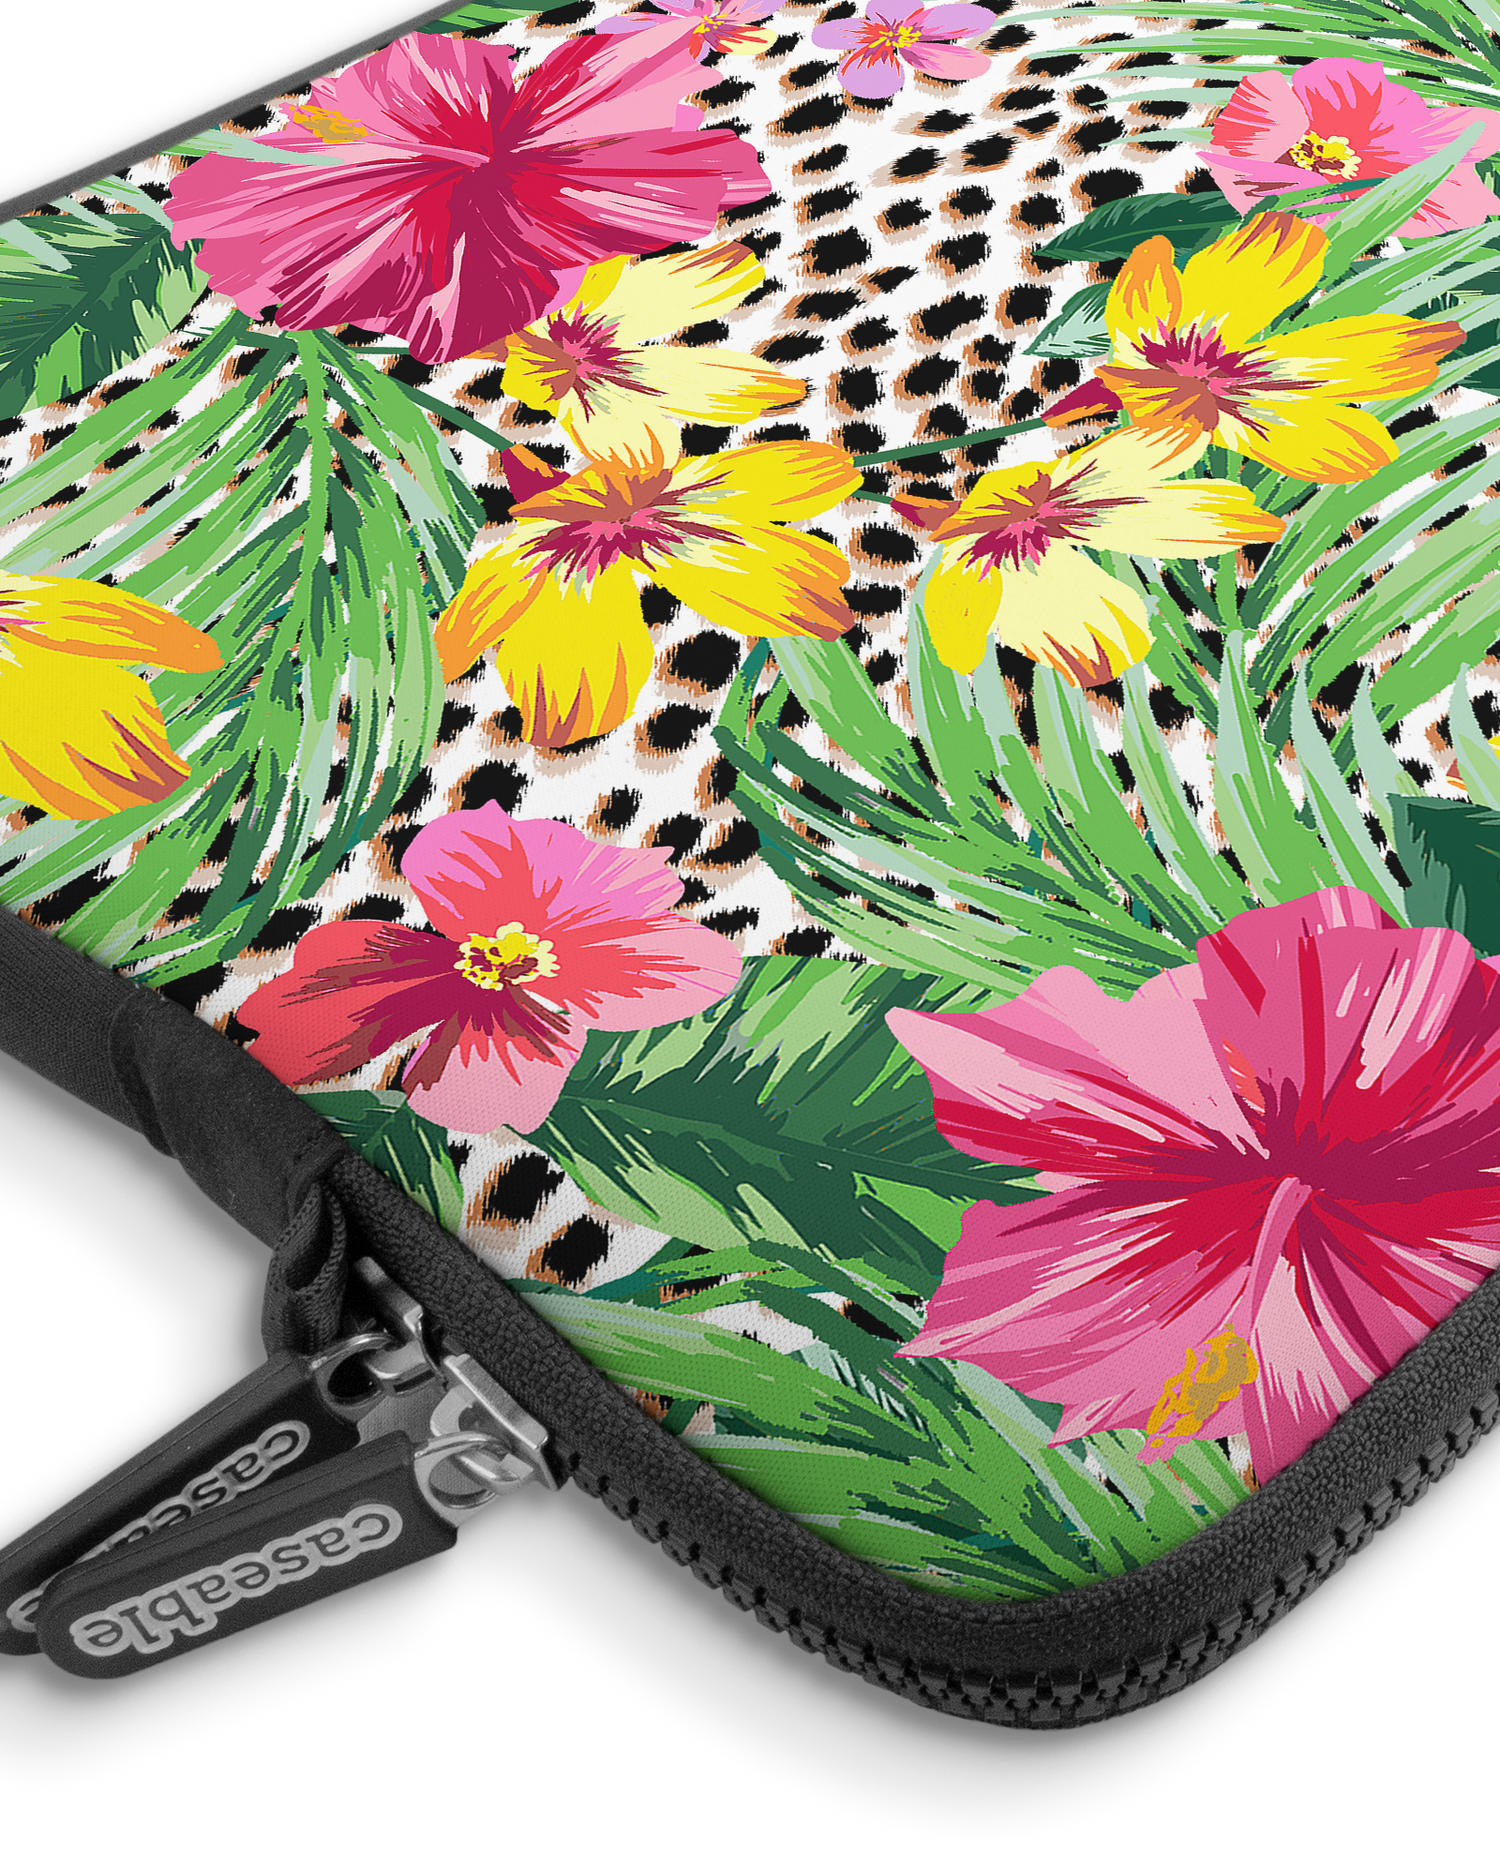 Tropical Cheetah Premium Laptop Bag 13-14 inch with device inside